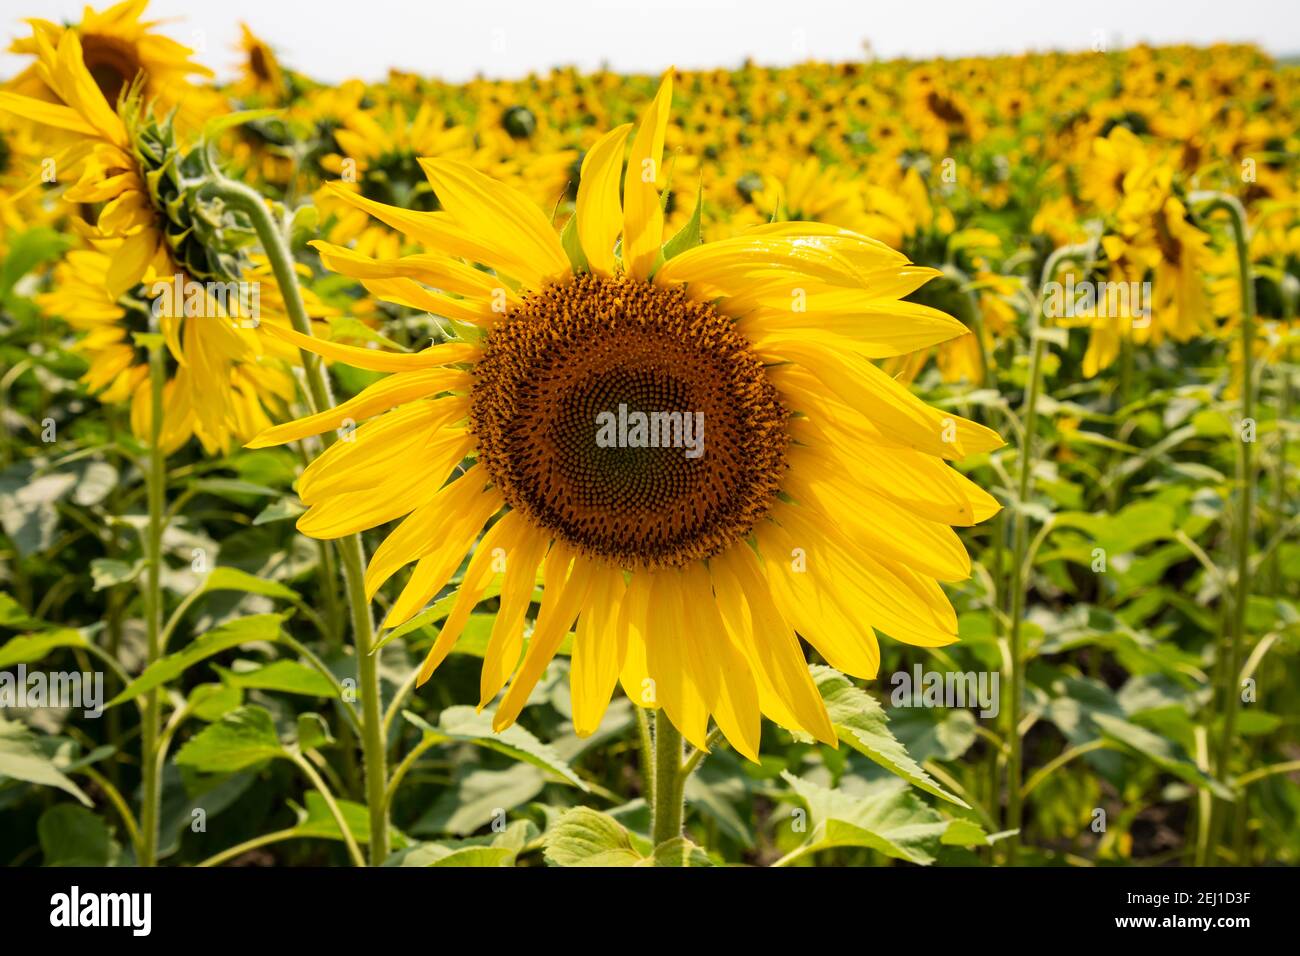 Sunflowers in the field. Stock Photo